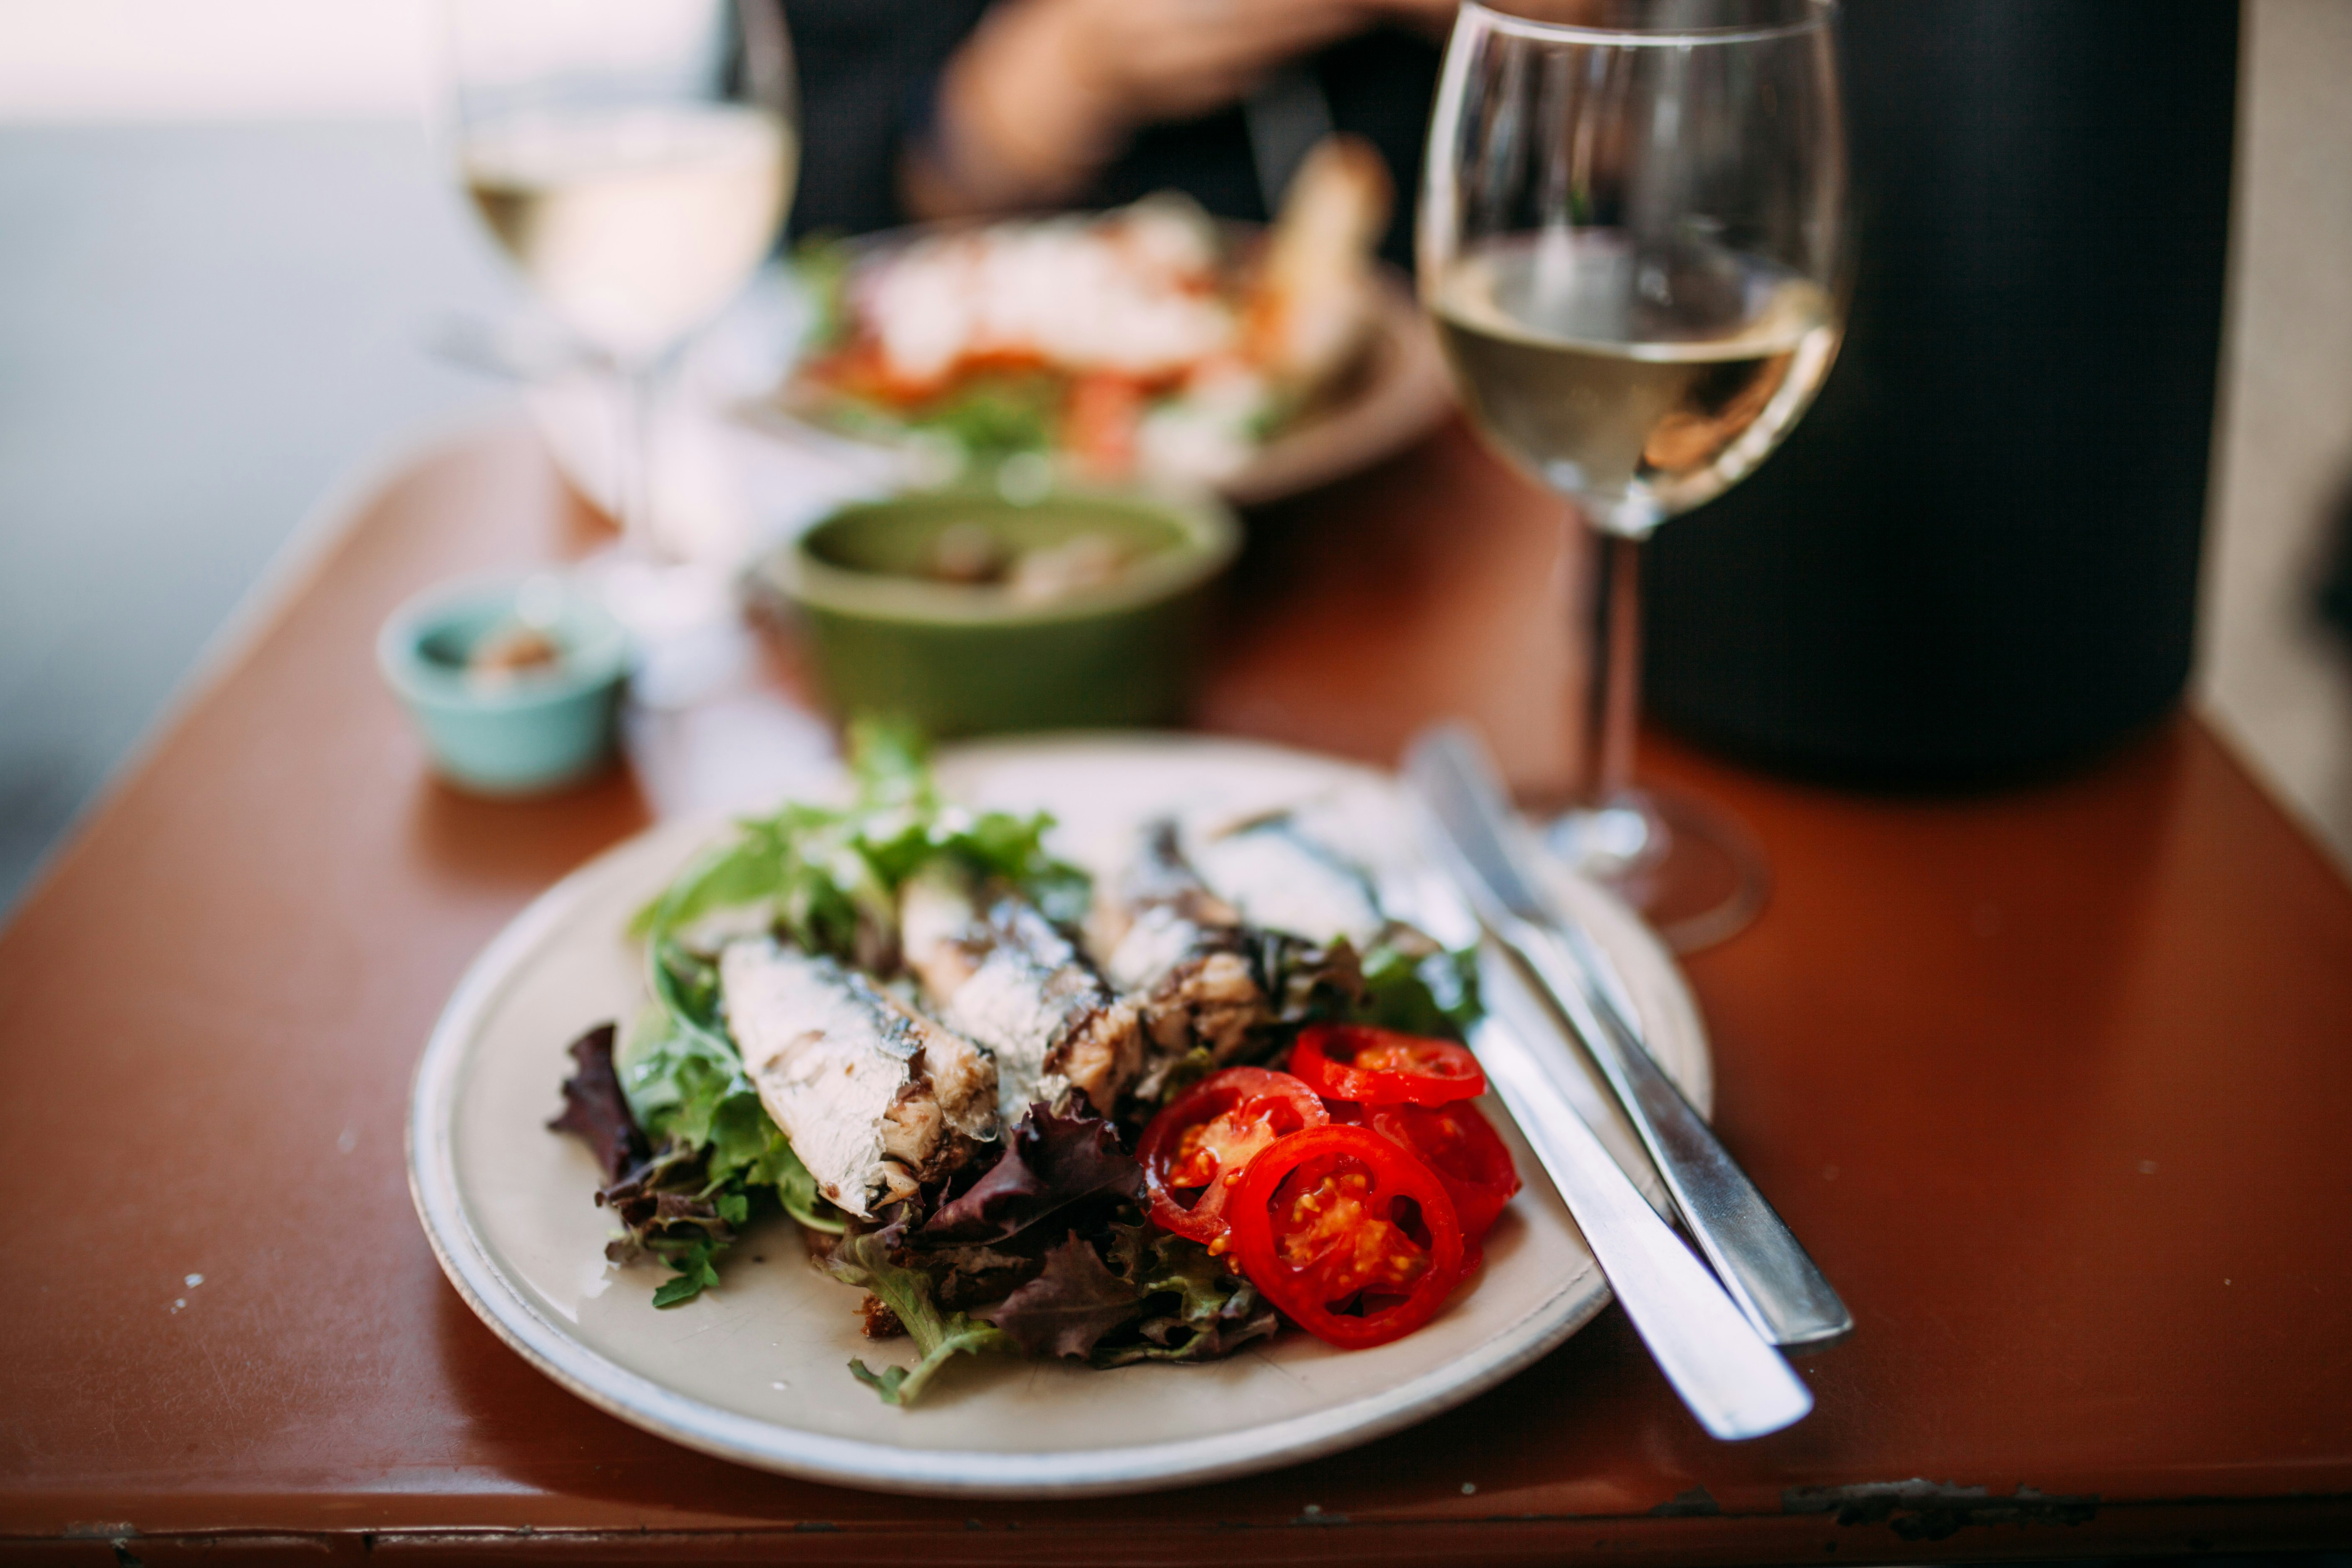 A plate sits in the foreground on a table, with three sardines sitting atop some mixed-leaf salad with sliced cherry tomatoes; in the background are blurred glasses of white wine.